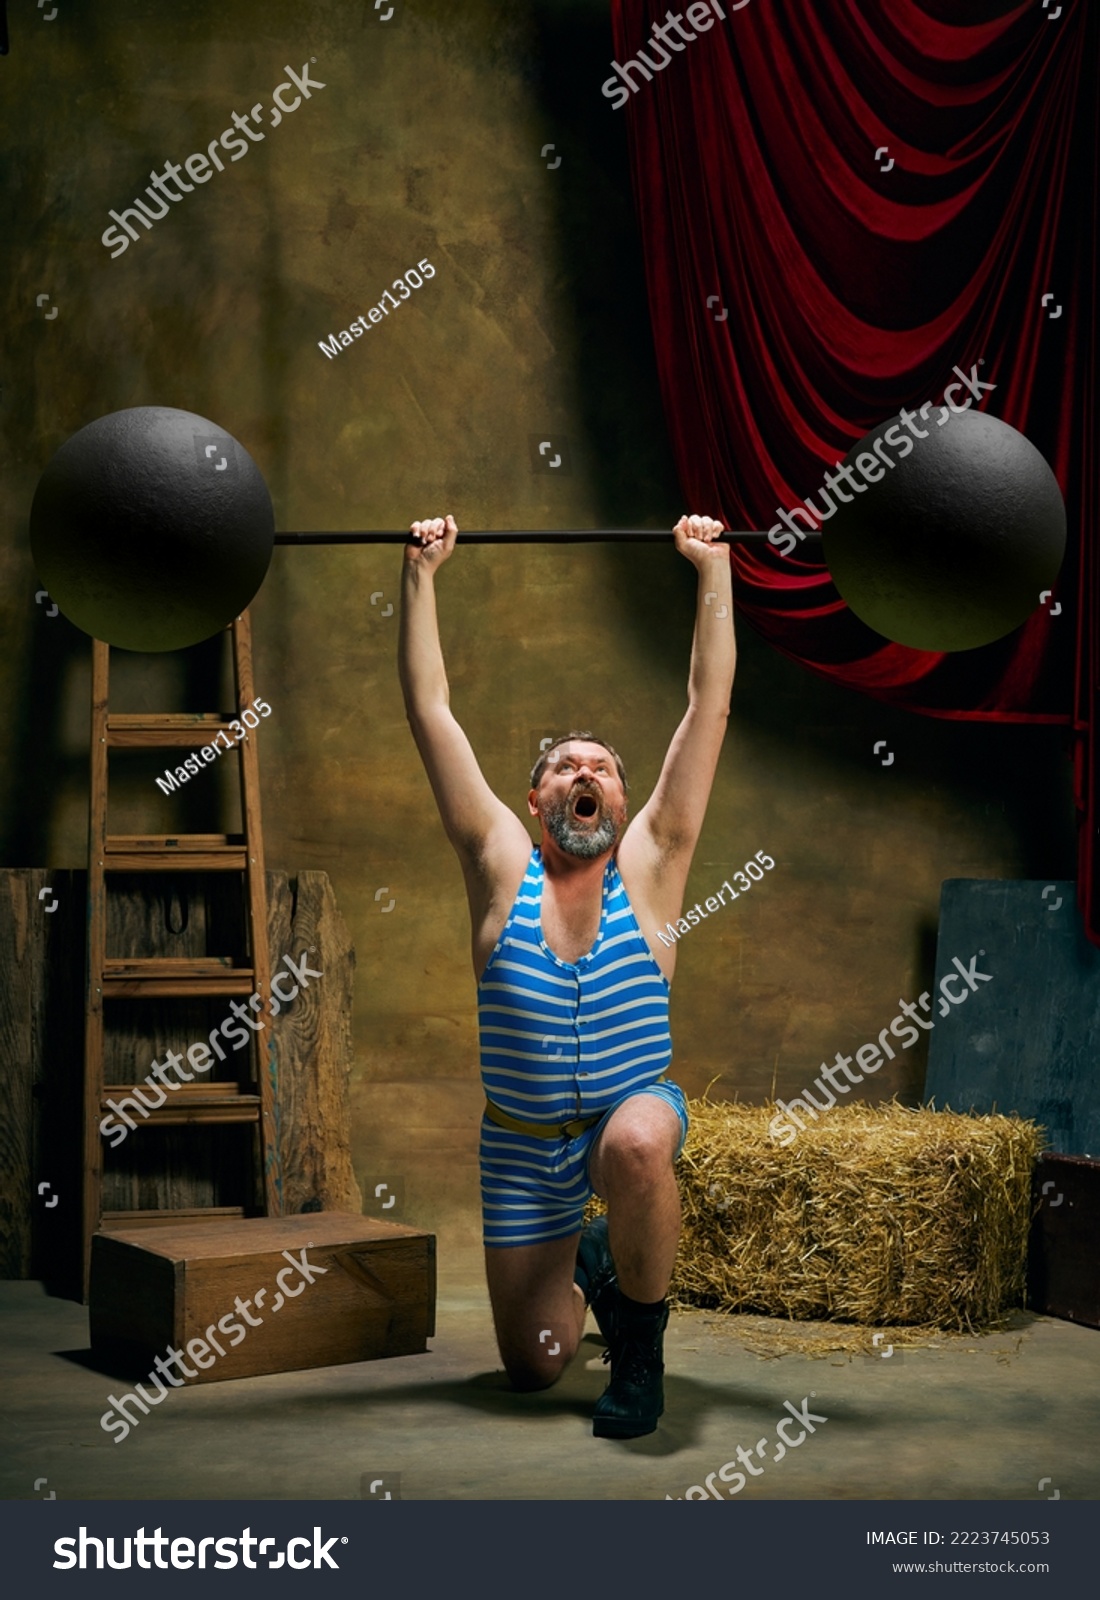 Circus athlete. Vintage portrait of retro circus strongman wearing blue striped sports swimsuit training with barbell over dark circus backstage background. Concept of creative art, fashion, style #2223745053